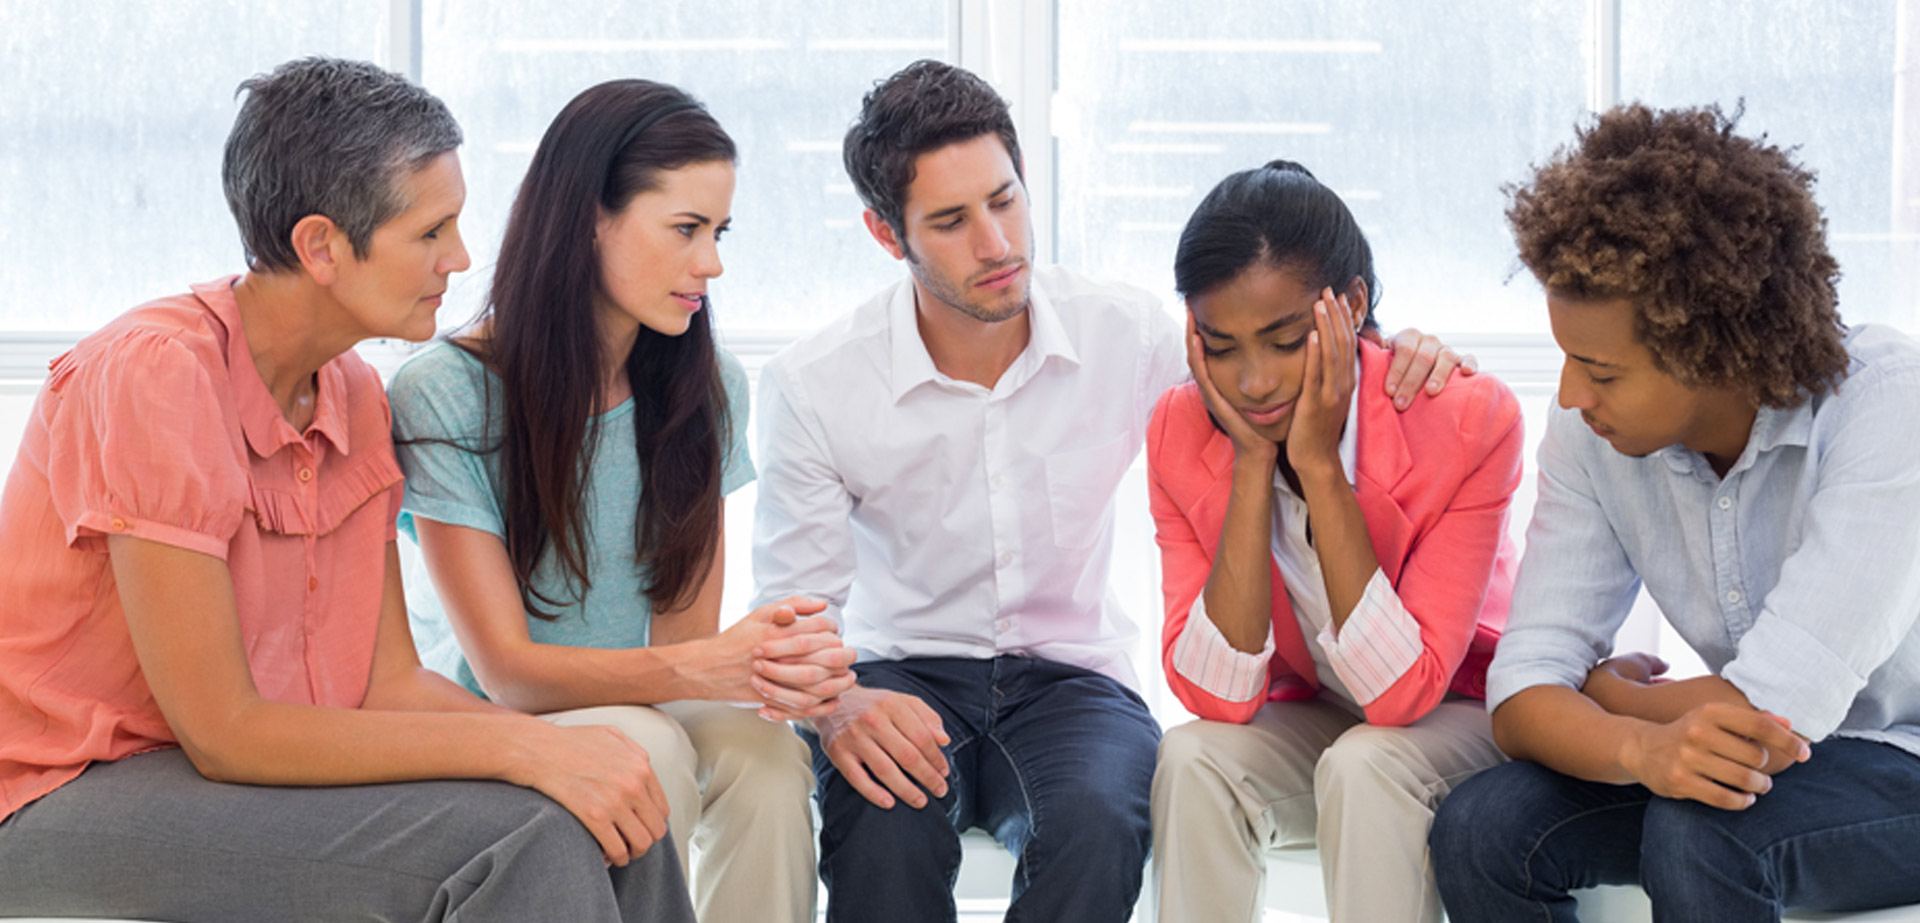 group of people supporting a depressed individual